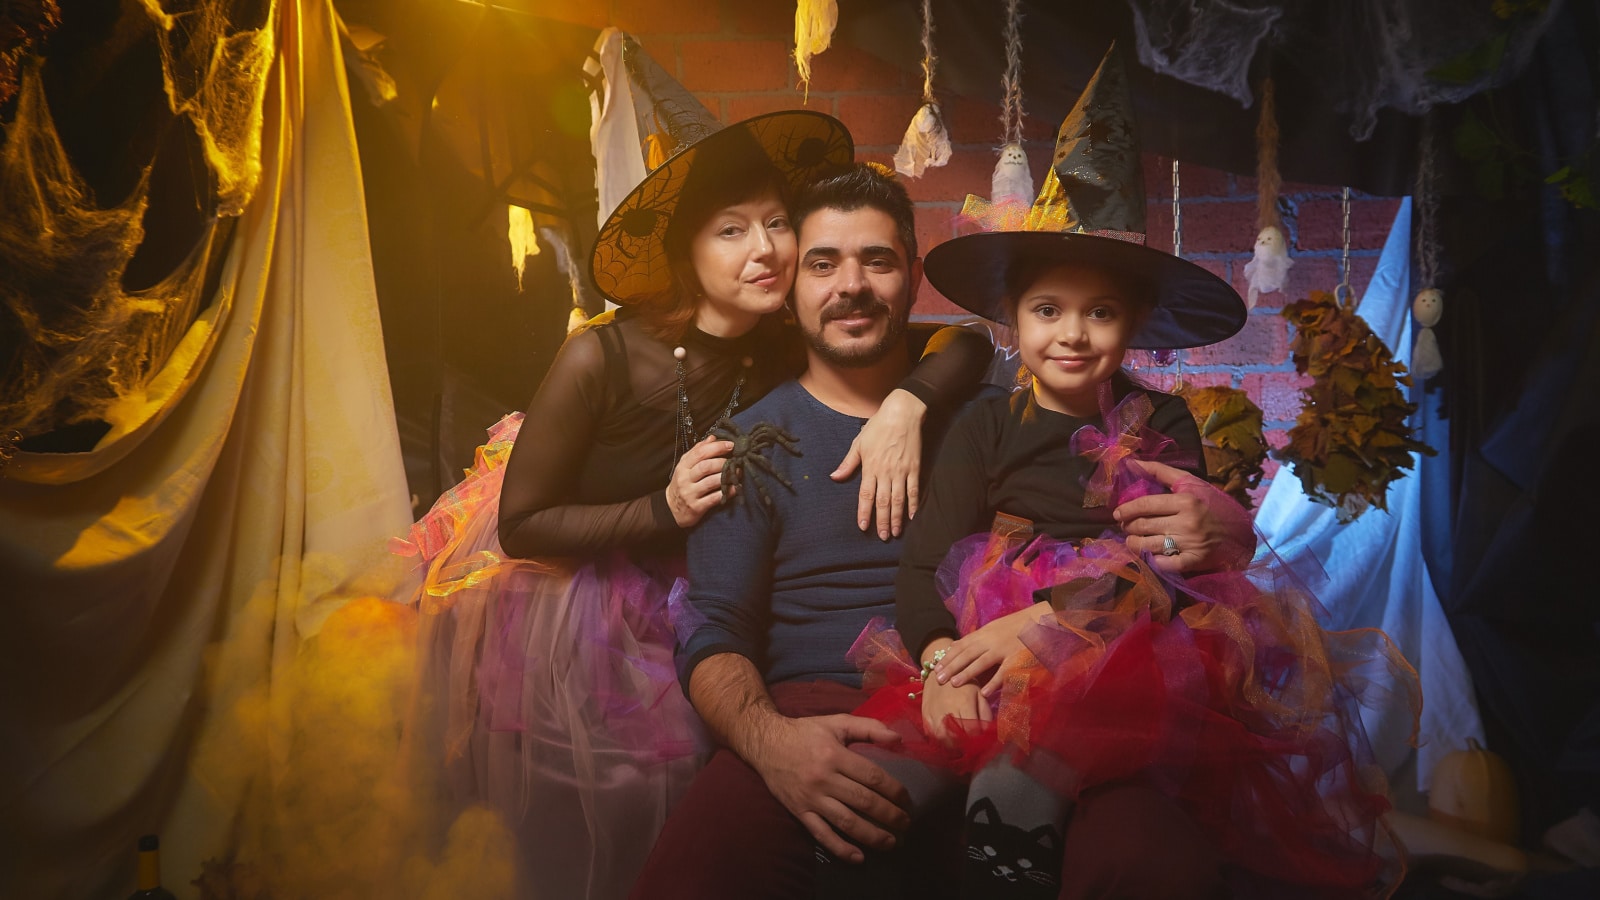 Mom, dad and daughter in costumes for holiday of halloween in dark decoration and with nice yellow light. Funny nice family during carnival in room. Mother, father and girl during funny photo shoot